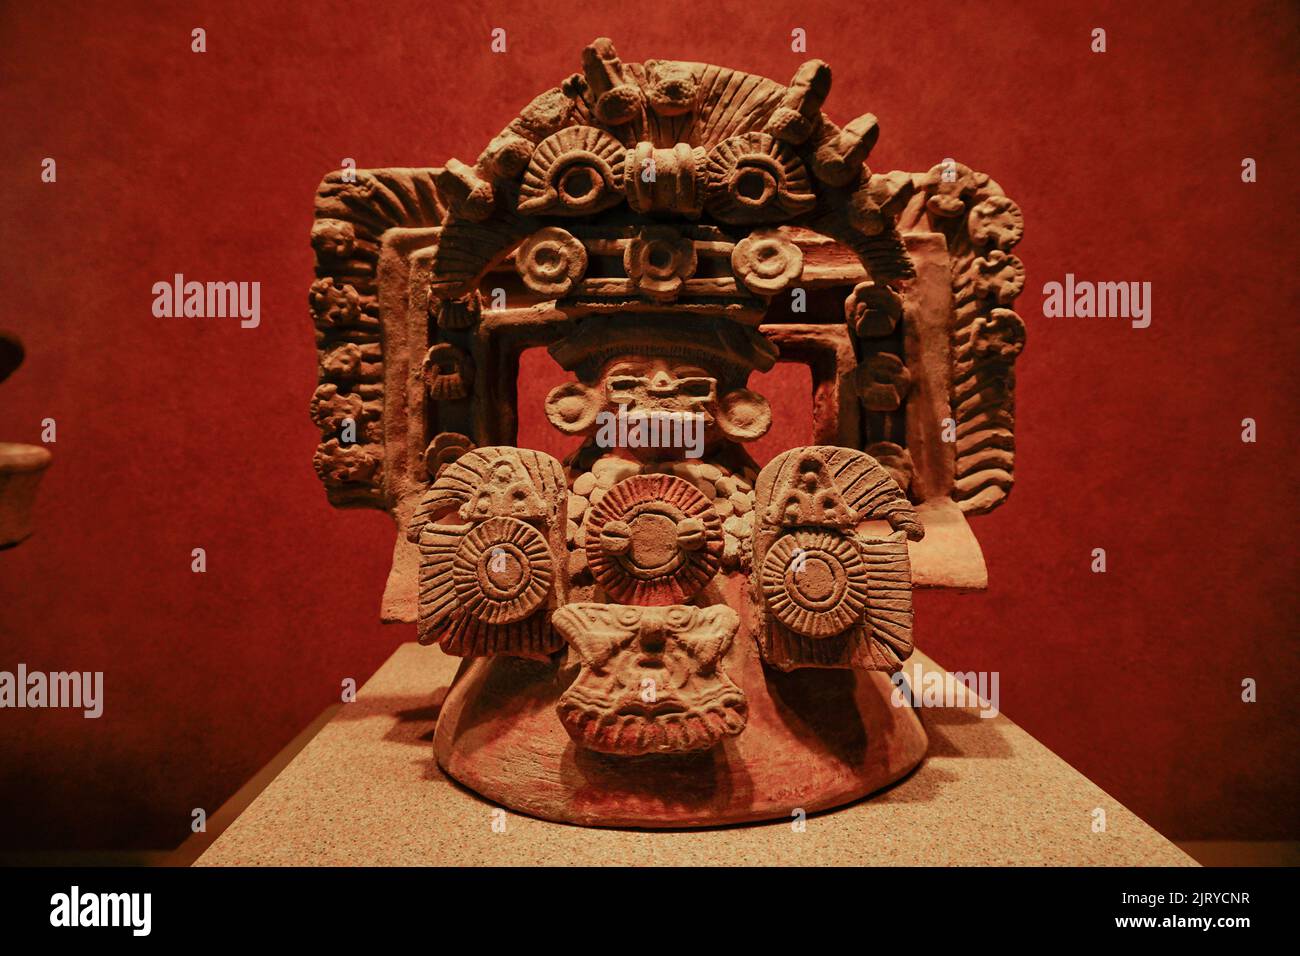 Ceremonial brazier for rituals, from Teotihuacan, National Anthroplogy Museum, Chapultepec Park, Mexico City, Mexico Stock Photo